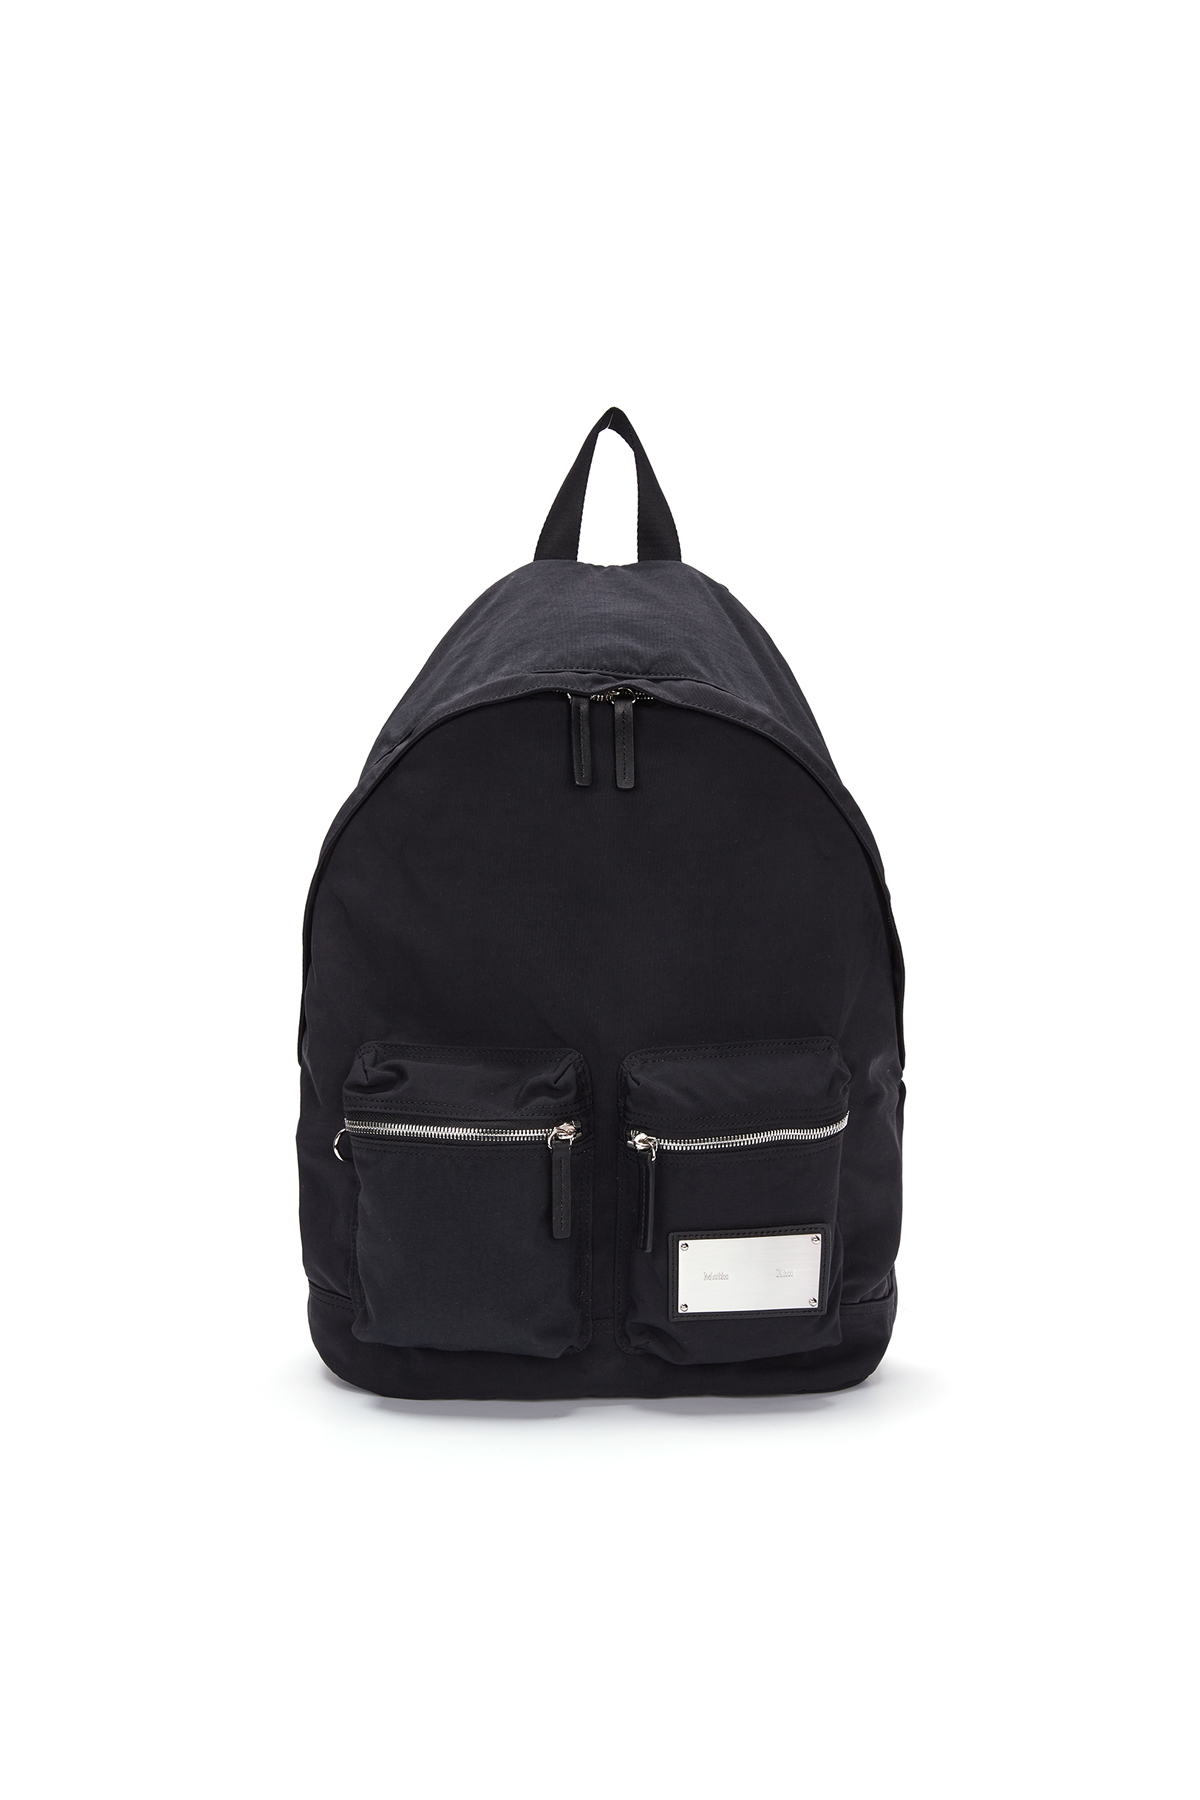 CARGO ALL DAY BACK PACK IN BLACK